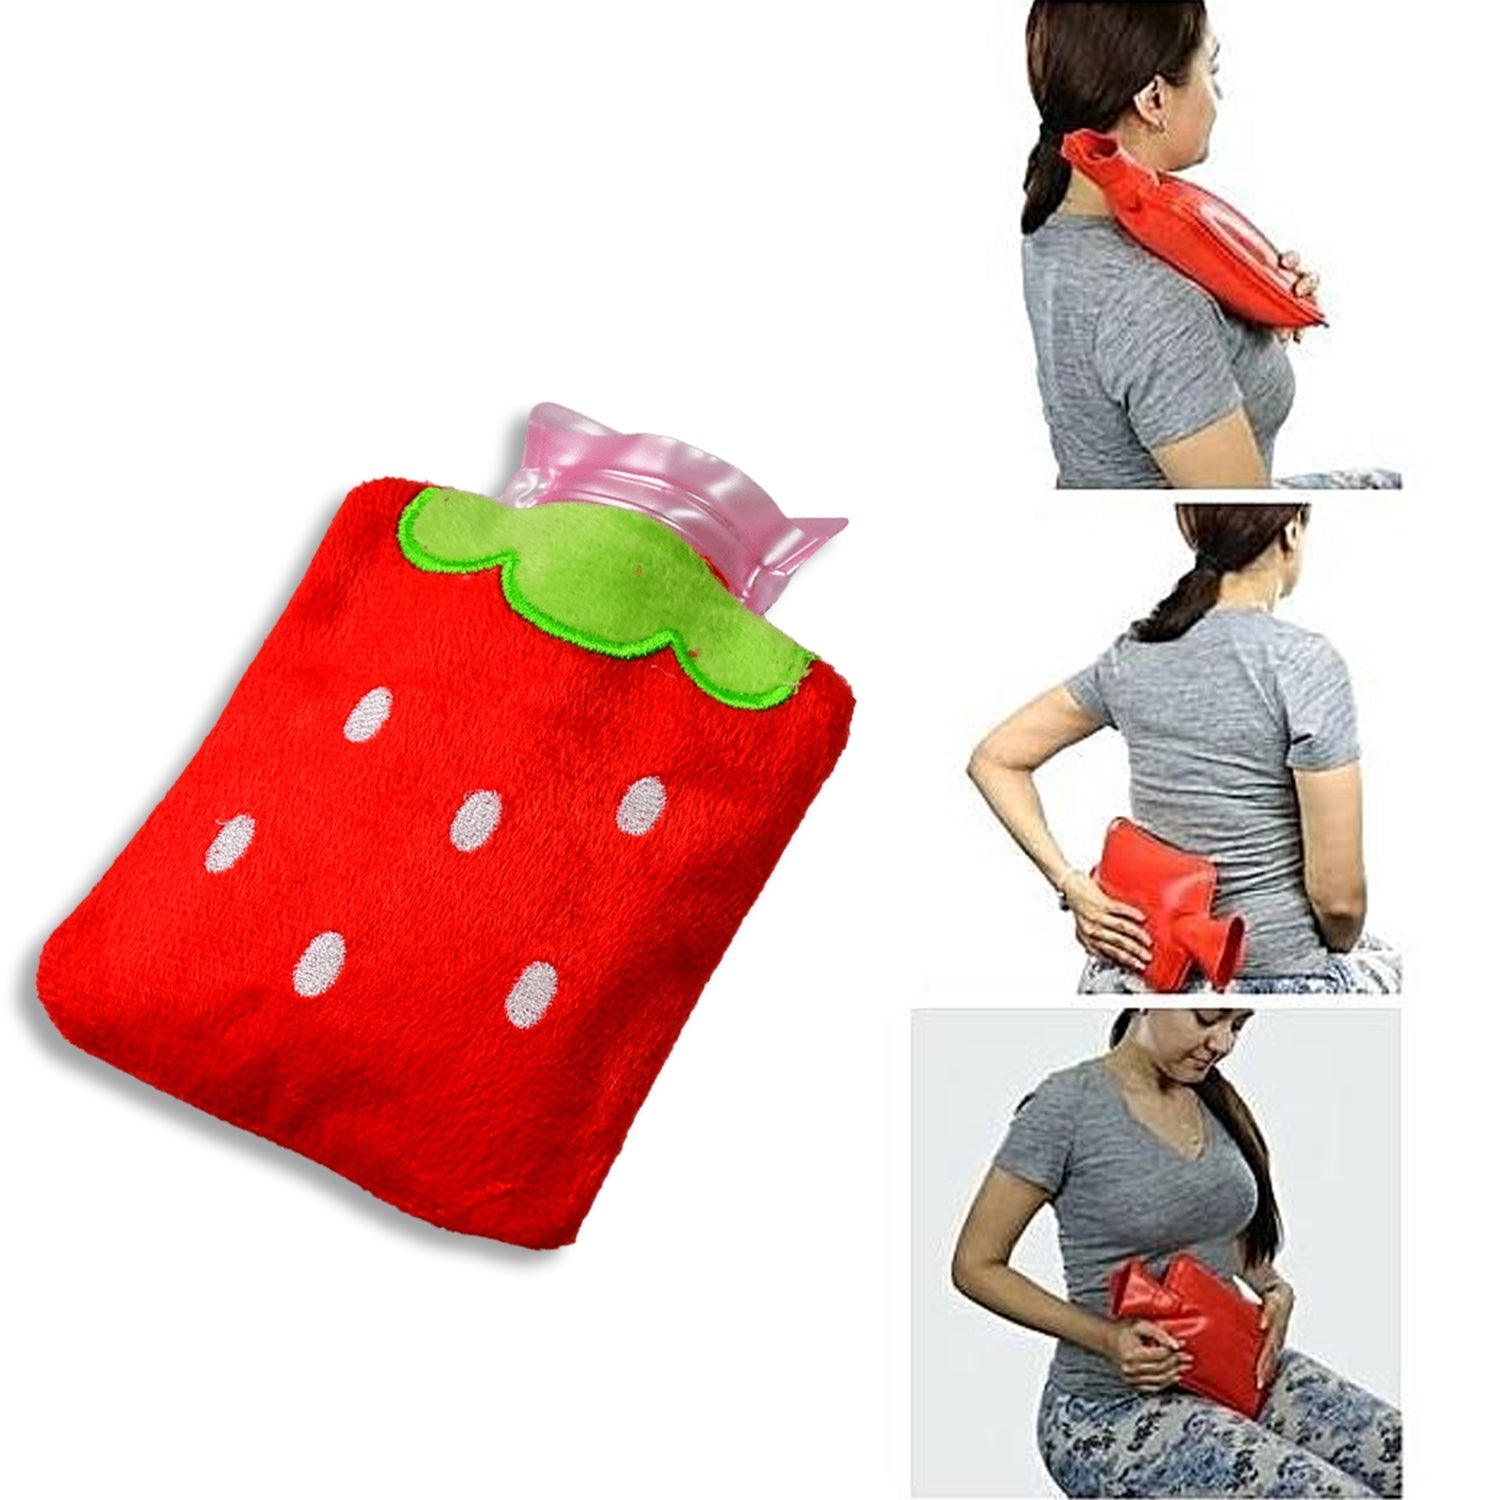 6516 Strawberry small Hot Water Bag with Cover for Pain Relief, Neck, Shoulder Pain and Hand, Feet Warmer, Menstrual Cramps. DeoDap